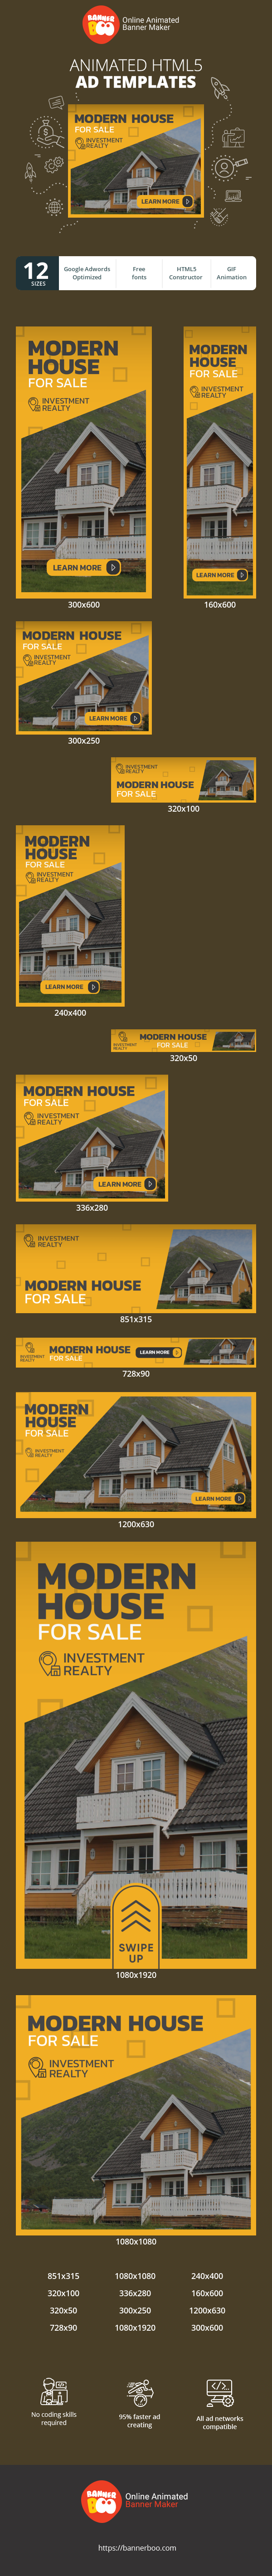 Banner ad template — Modern House For Sale — Real Estate